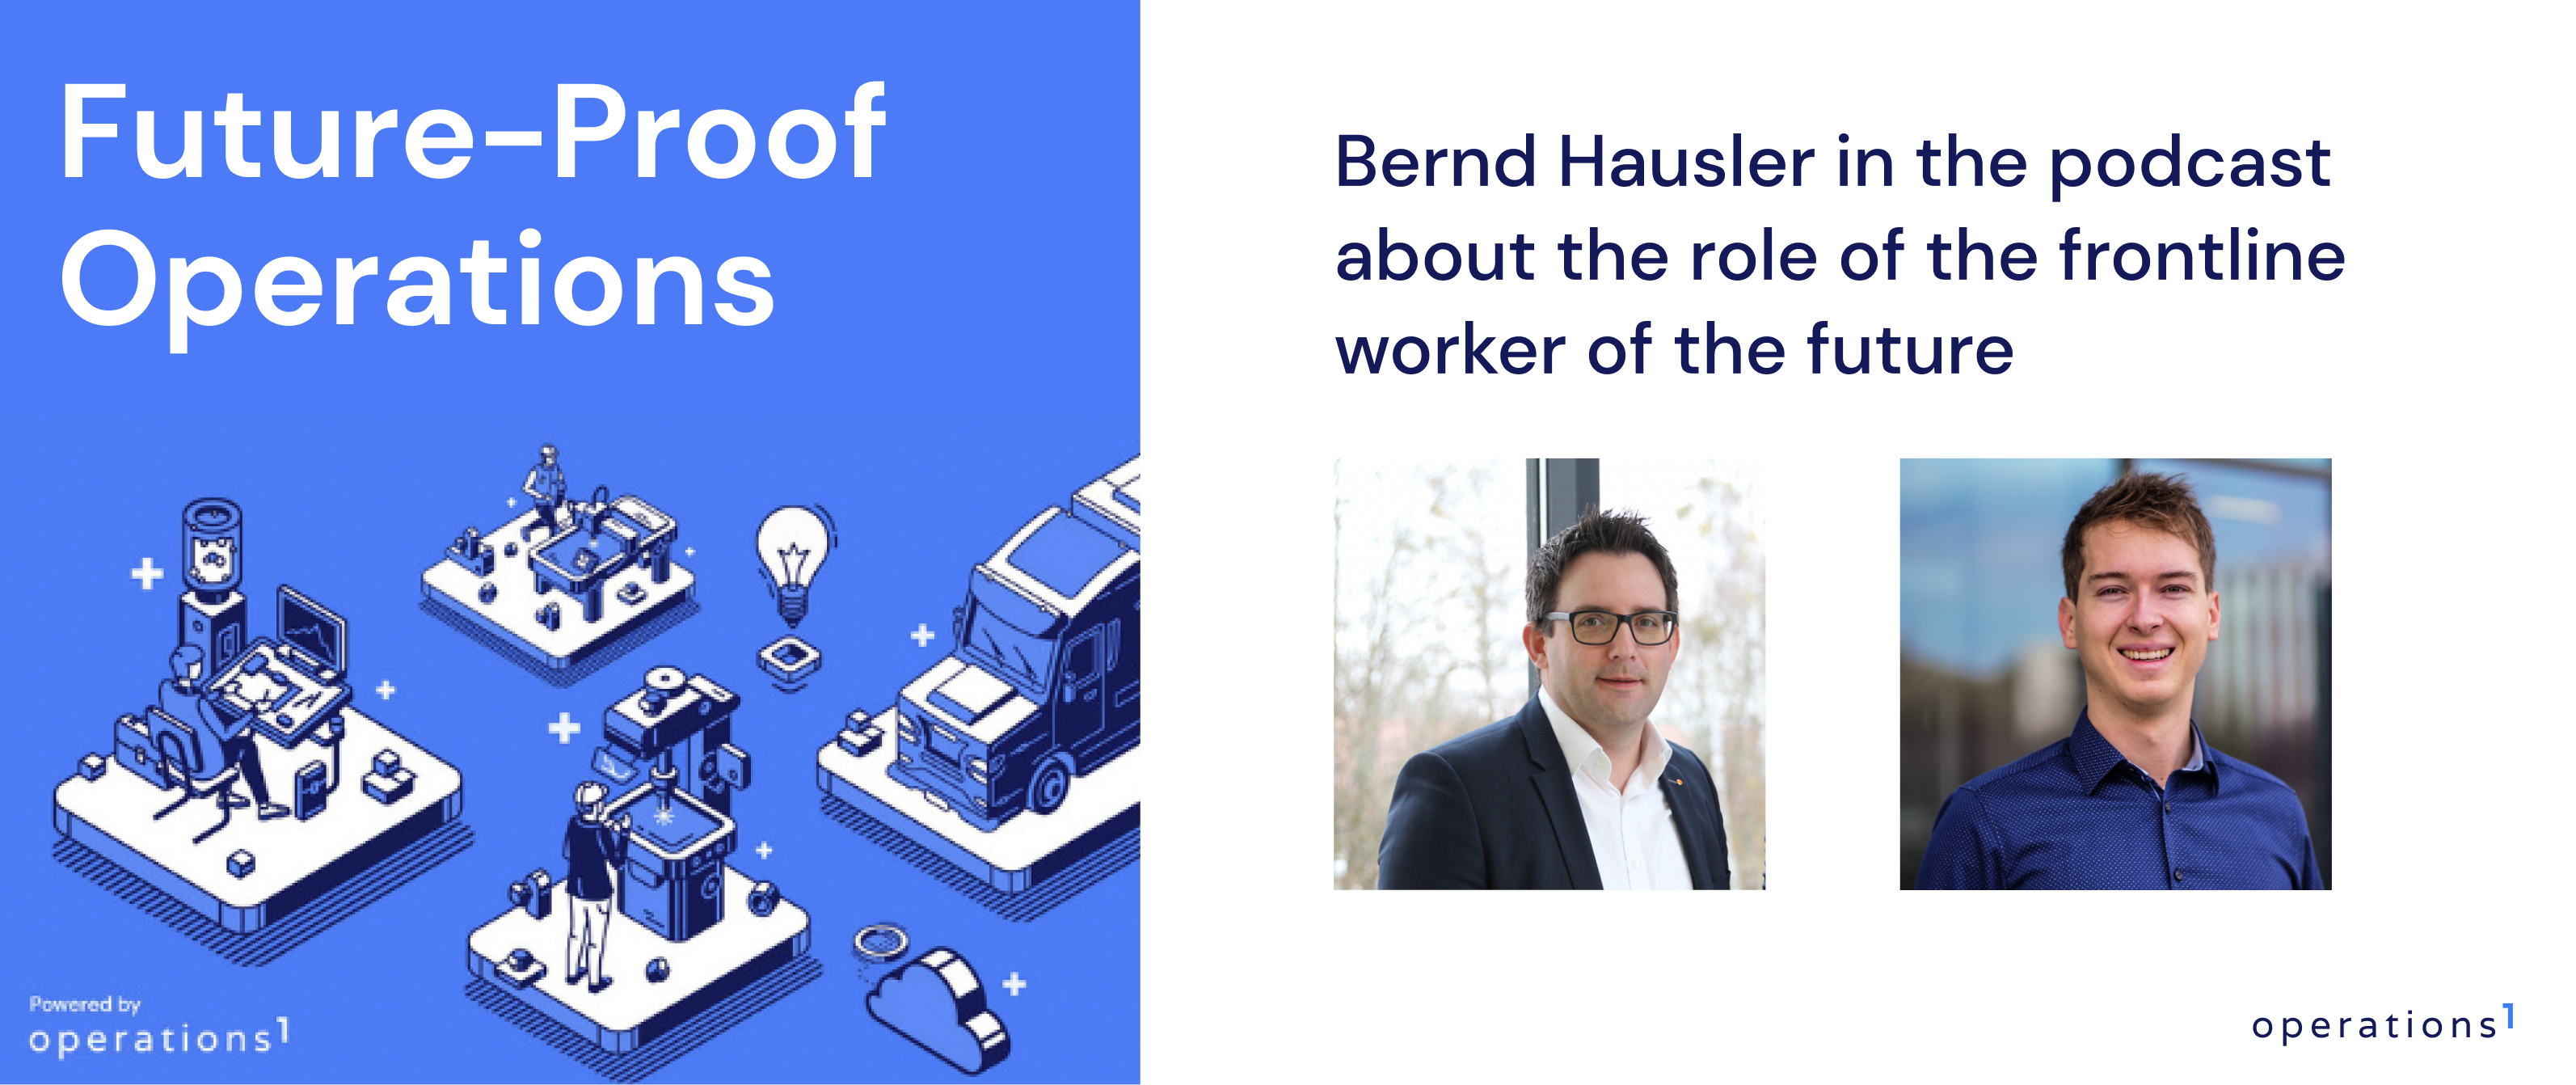 Interview Benjamin Brockmann with Bernd Hausler in the Future Proof Operations Podcast